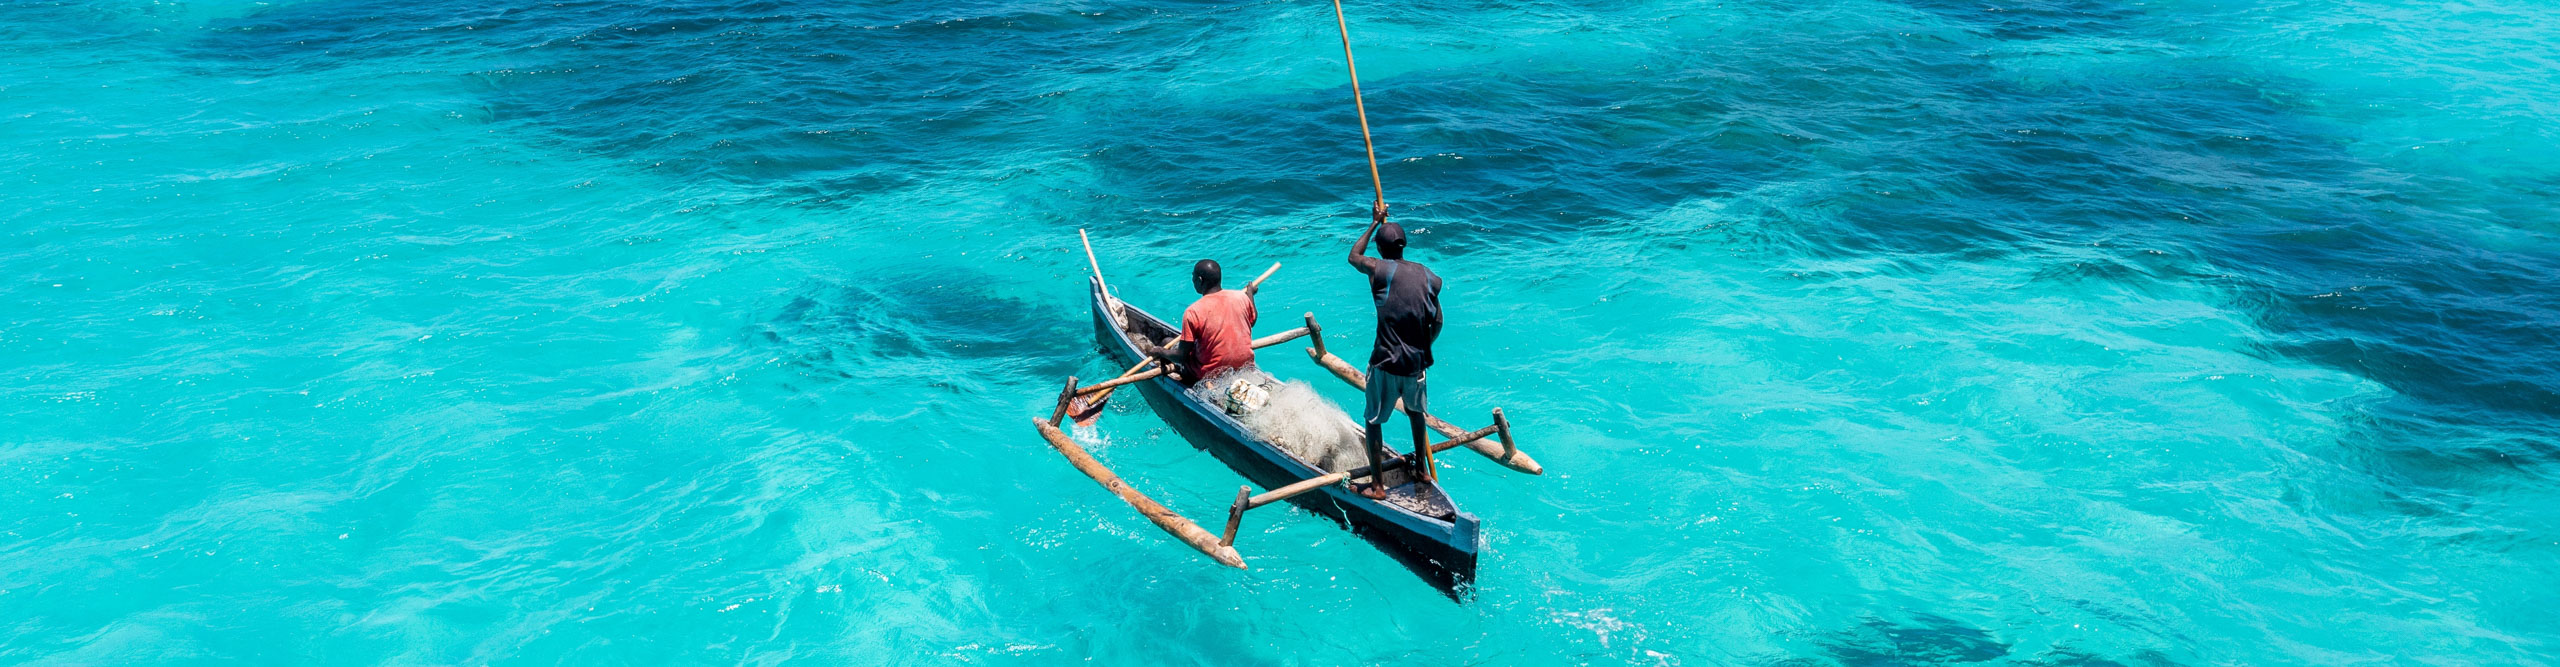 Fishermen in a boat in the coast of Mozambique, aerial drone view with tropical blue clear waters.